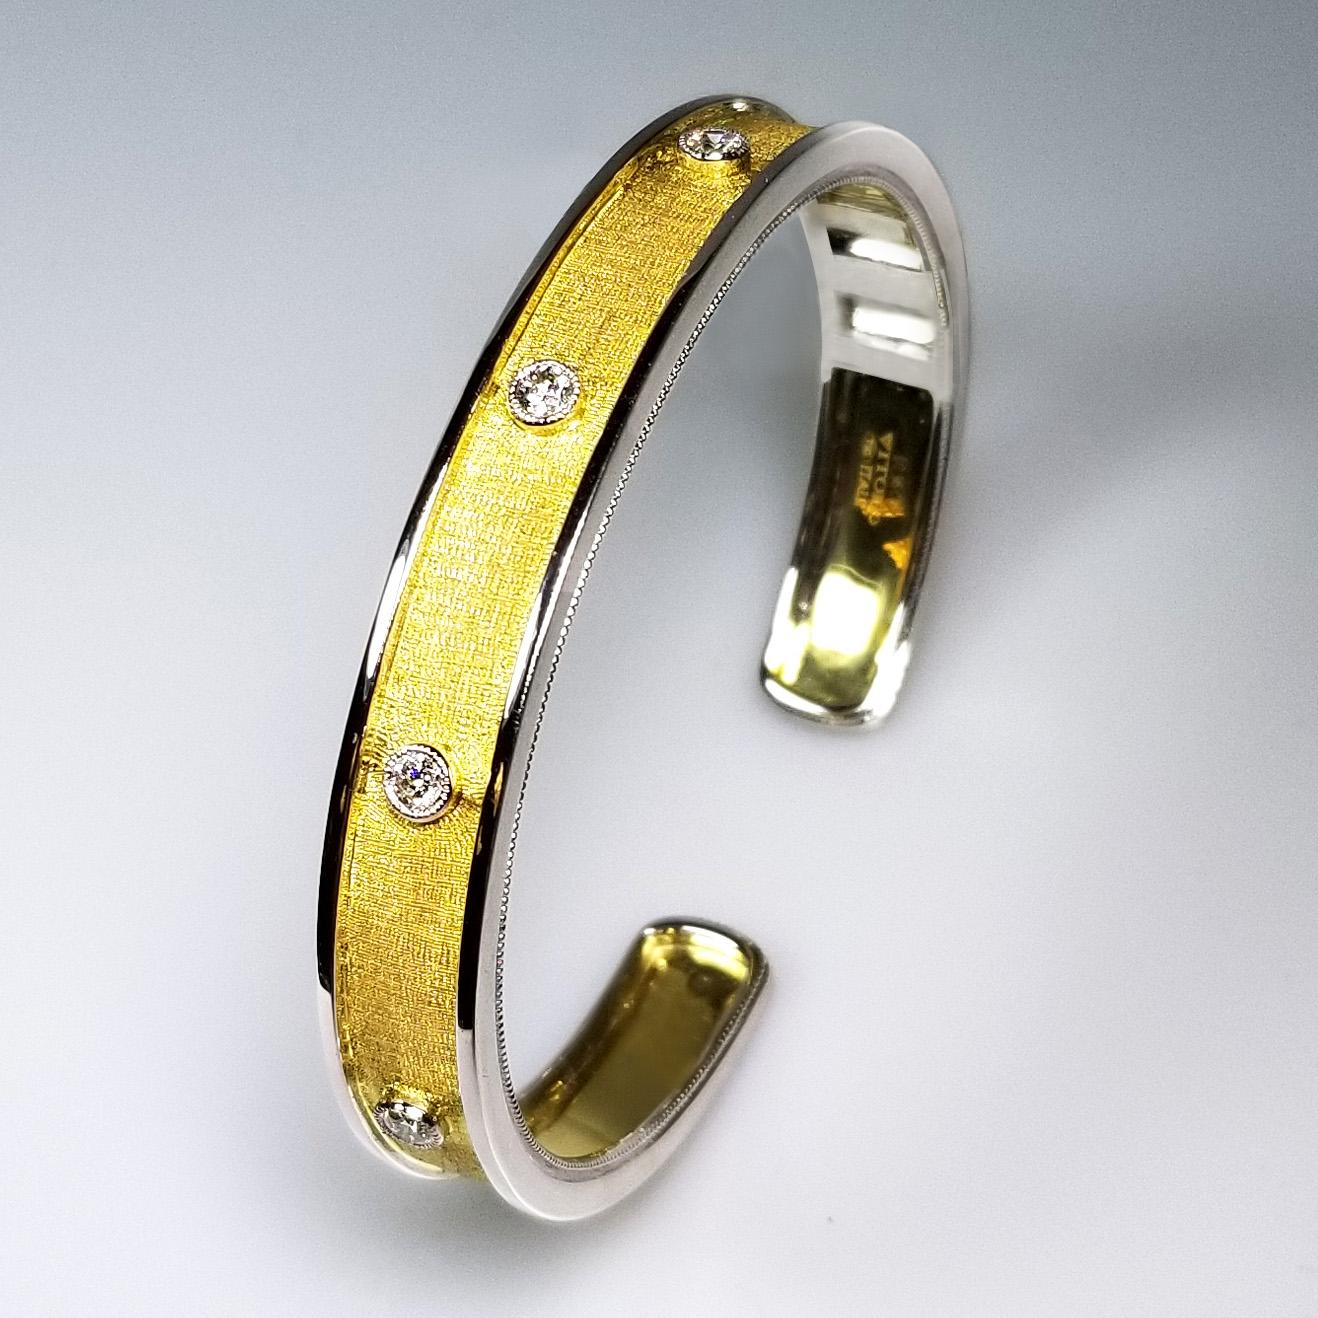 Produced by award winner Italian designer Stefano Vitolo. Stefano creates custom artisanal, one of a kind jewelry with excellent gemstones in a truly old word Italian craftsmanship
This handcrafted bangle has 0.95 carat total weight of F/G color and